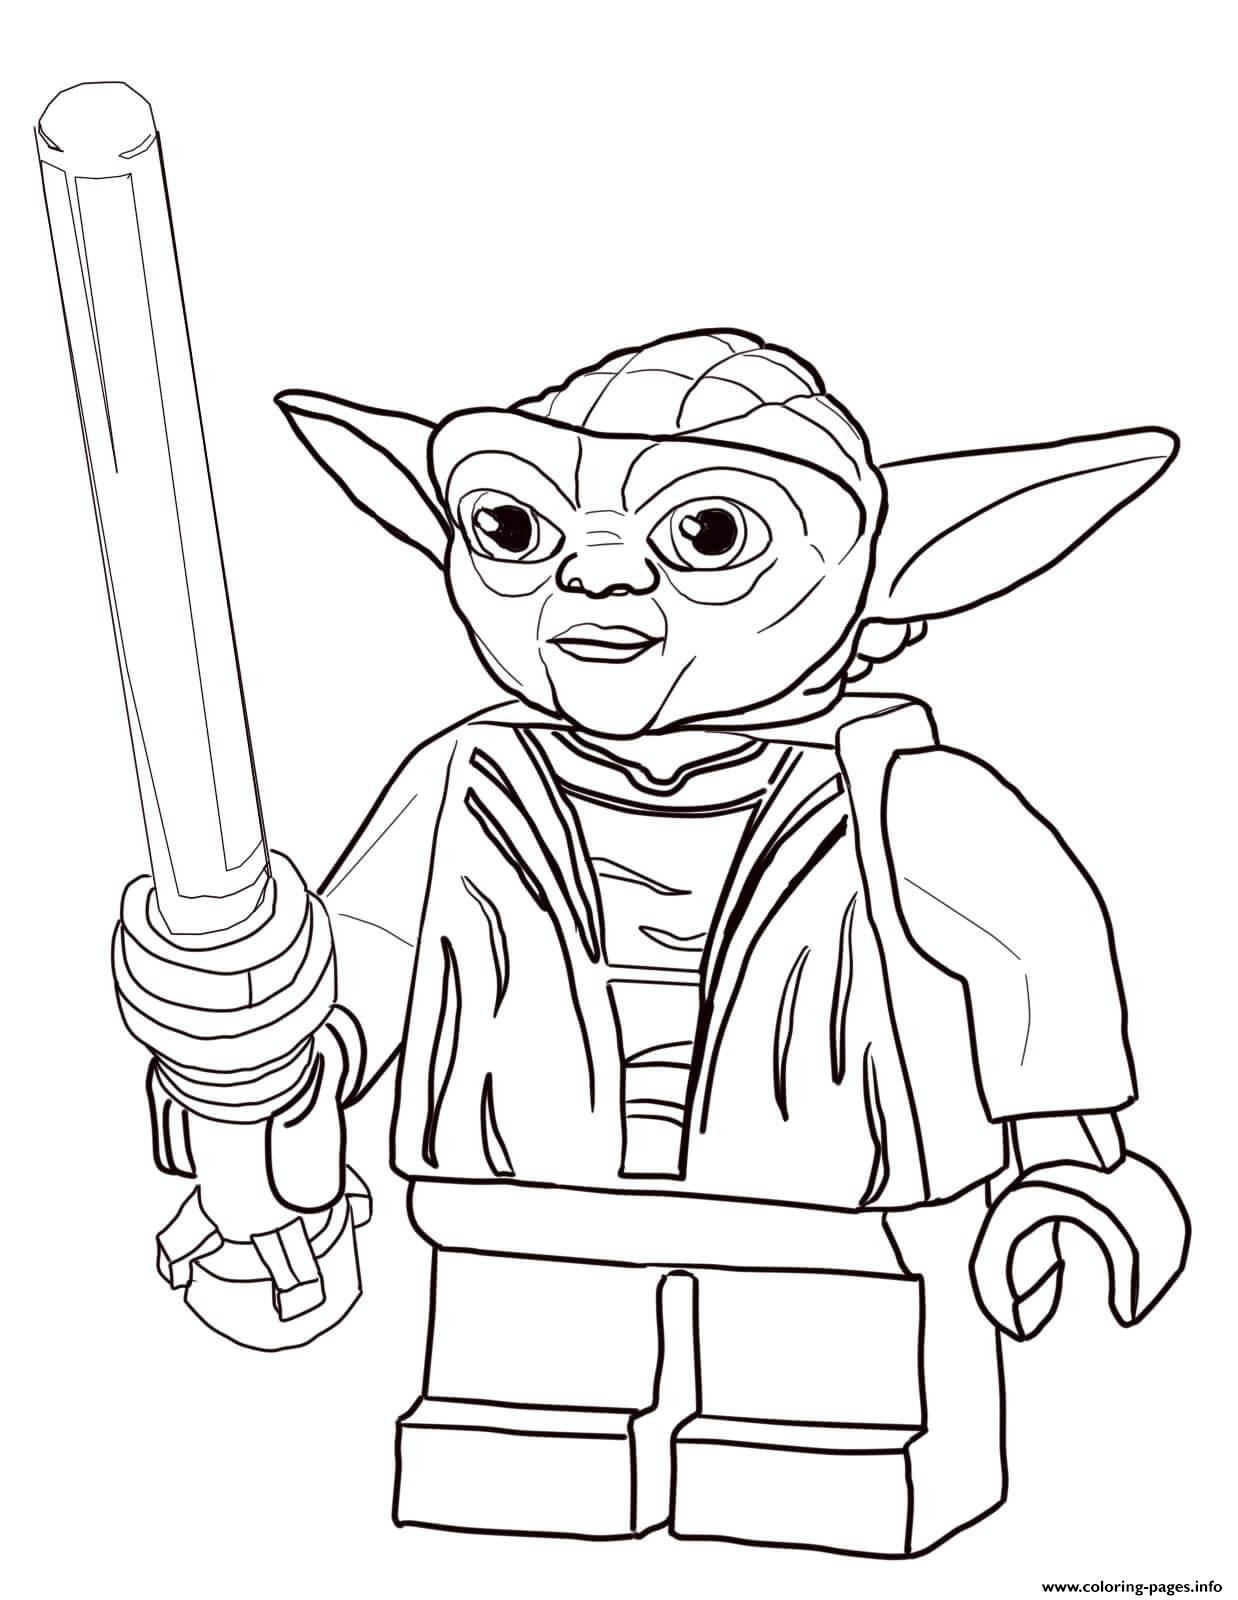 Baby Yoda Coloring Pages For Kids - Visual Arts Ideas